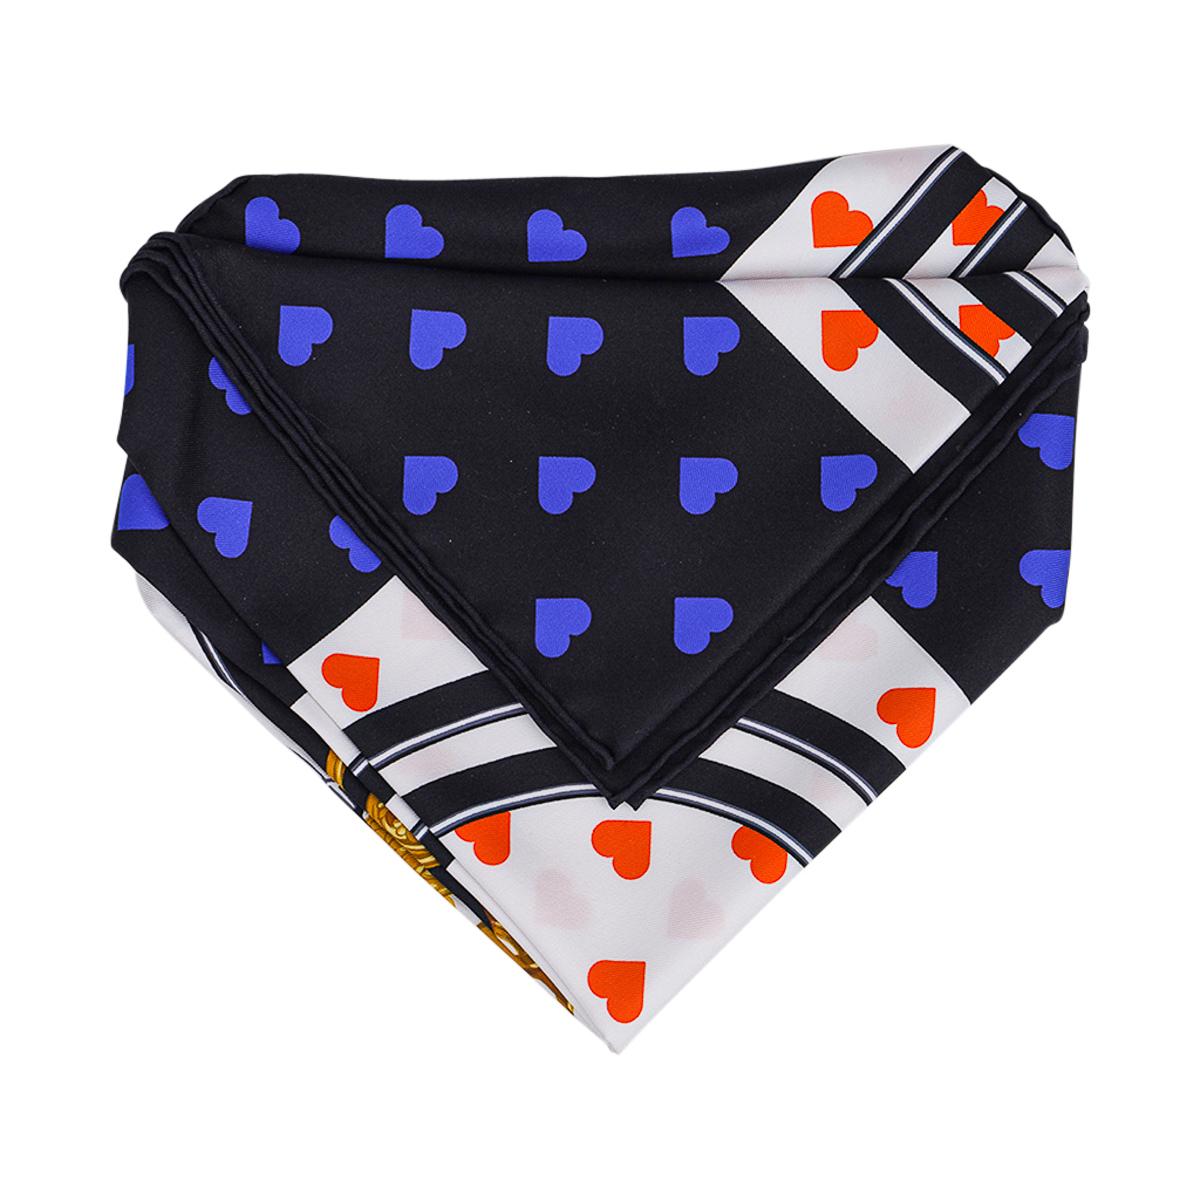 Mightychic offers a guaranteed authentic Limited Edition Le Carre Brides de Gala Love scarf. 
The most beloved scarf ever produced in the world!
Border is black with blue hearts with the central section in white with orange hearts showcasing the